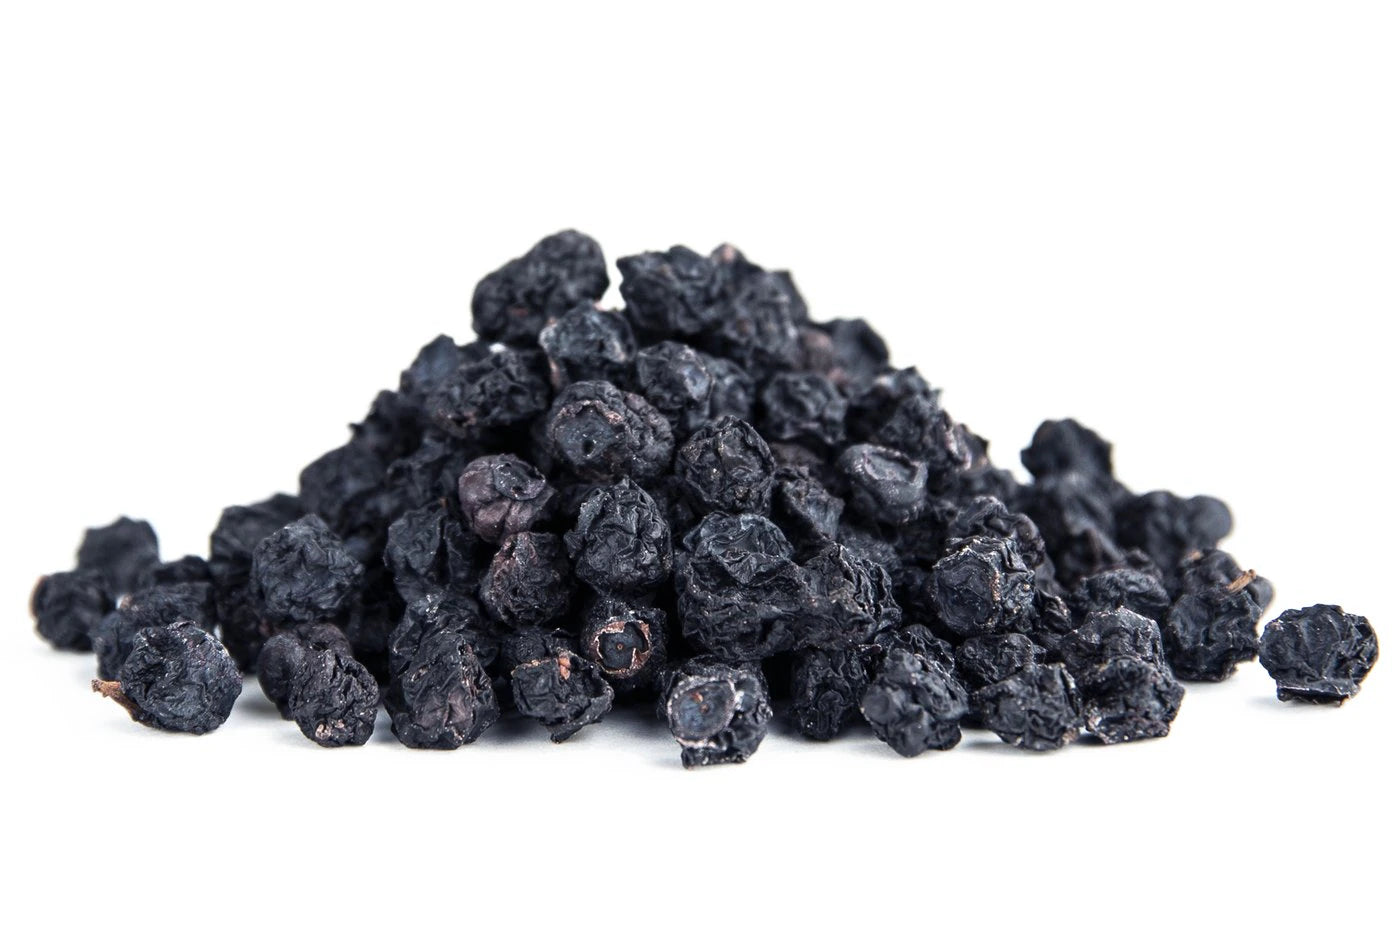 Freeze-Dried Blueberries!